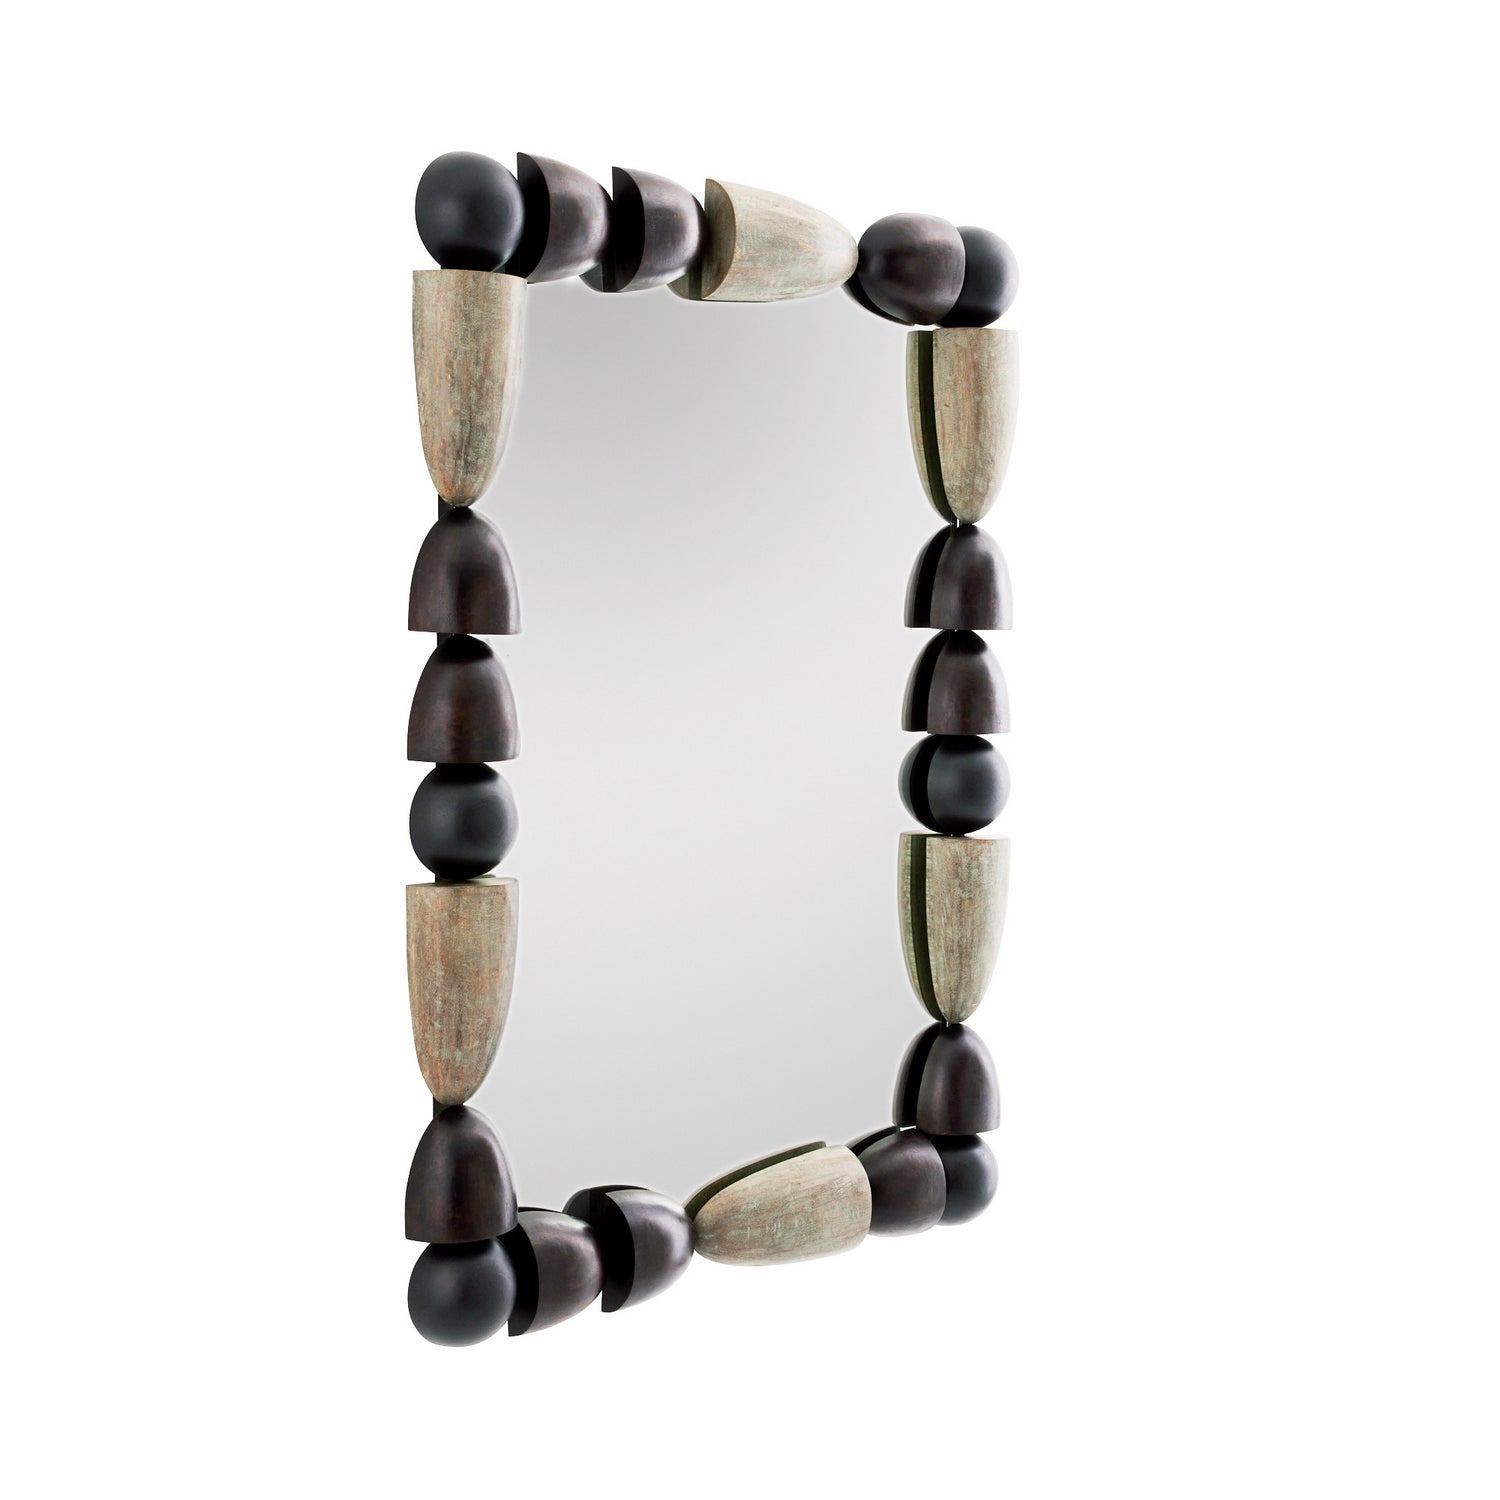 Mirror from the Montego collection in Gray Wash finish